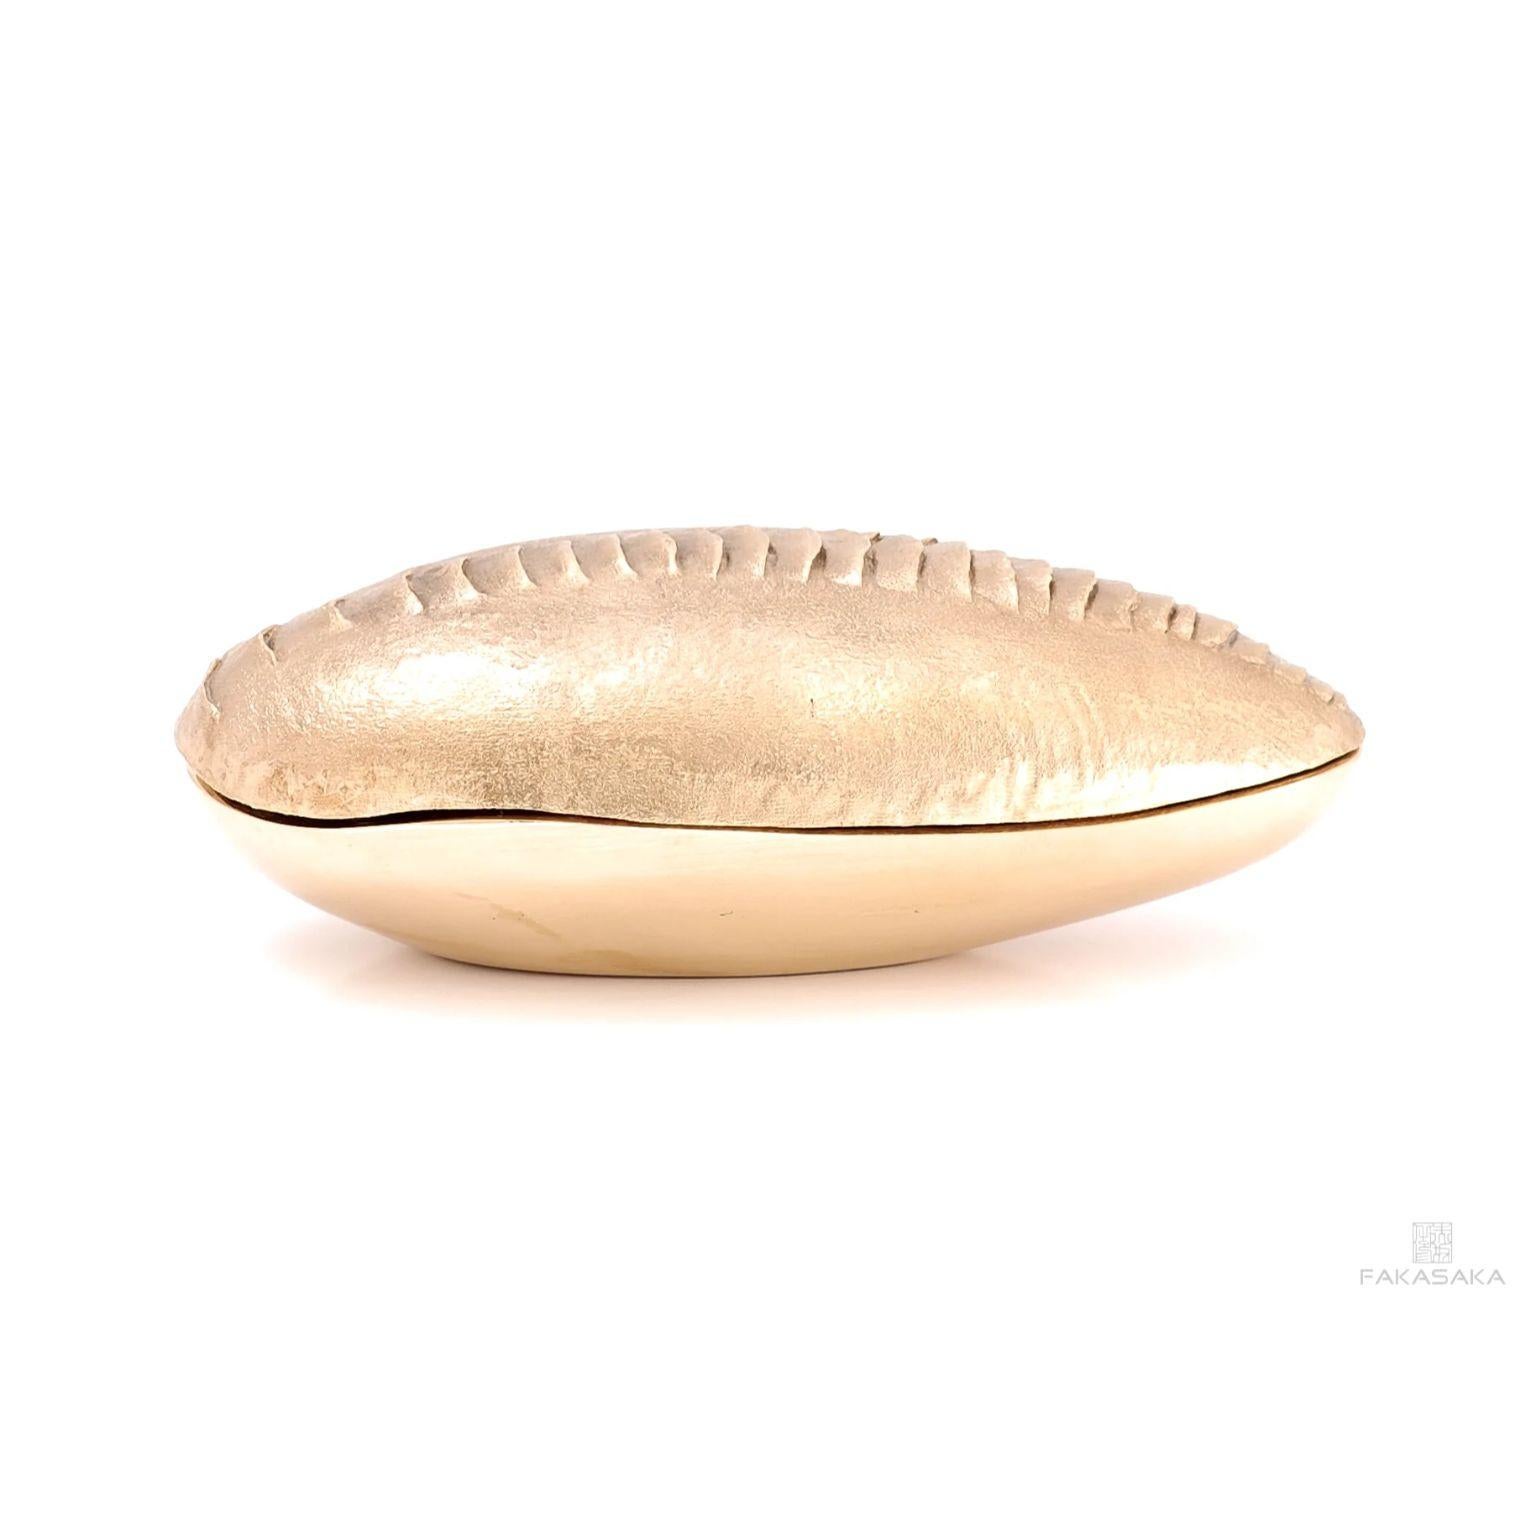 Pearl box by Fakasaka design.
Dimensions: W 26 cm D 14 cm H 9 cm.
Materials: polished bronze.

 Fakasaka is a design company focused on production of high-end furniture, lighting, decorative objects, jewels, and accessories.

 Established in